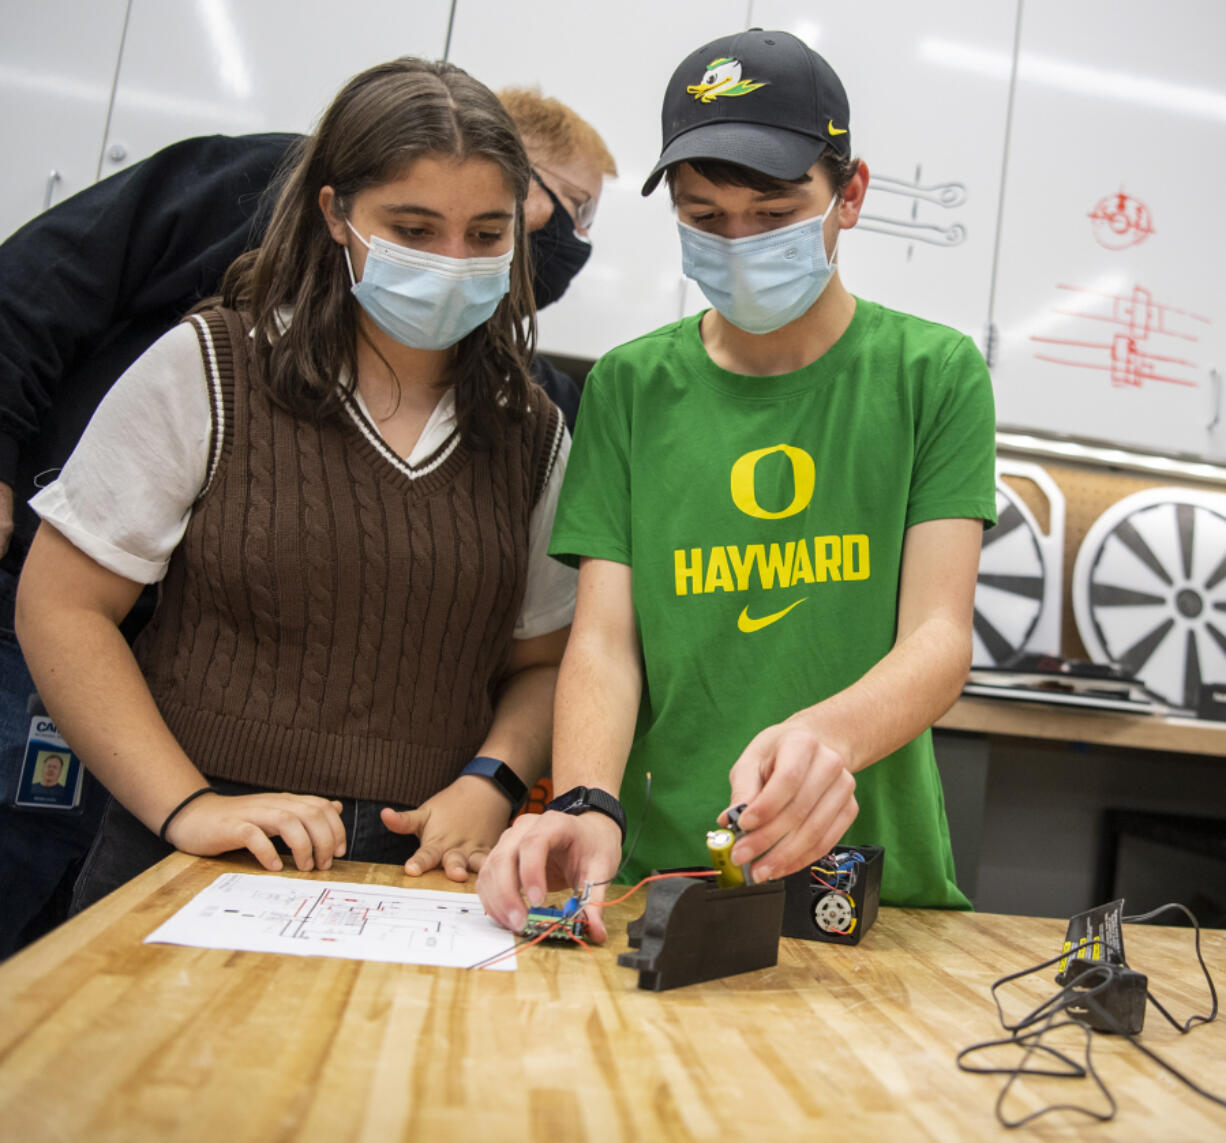 Discovery High School sophomore Jack Harding, right, and freshman Silvia Pujol talk about the wiring inside the motor housing of the Power Pivot on Dec. 1 at Discovery High School. Each housing unit is designed to fit a number of wires and motors into a tight space, and takes about 12 hours to create using a 3D printer.